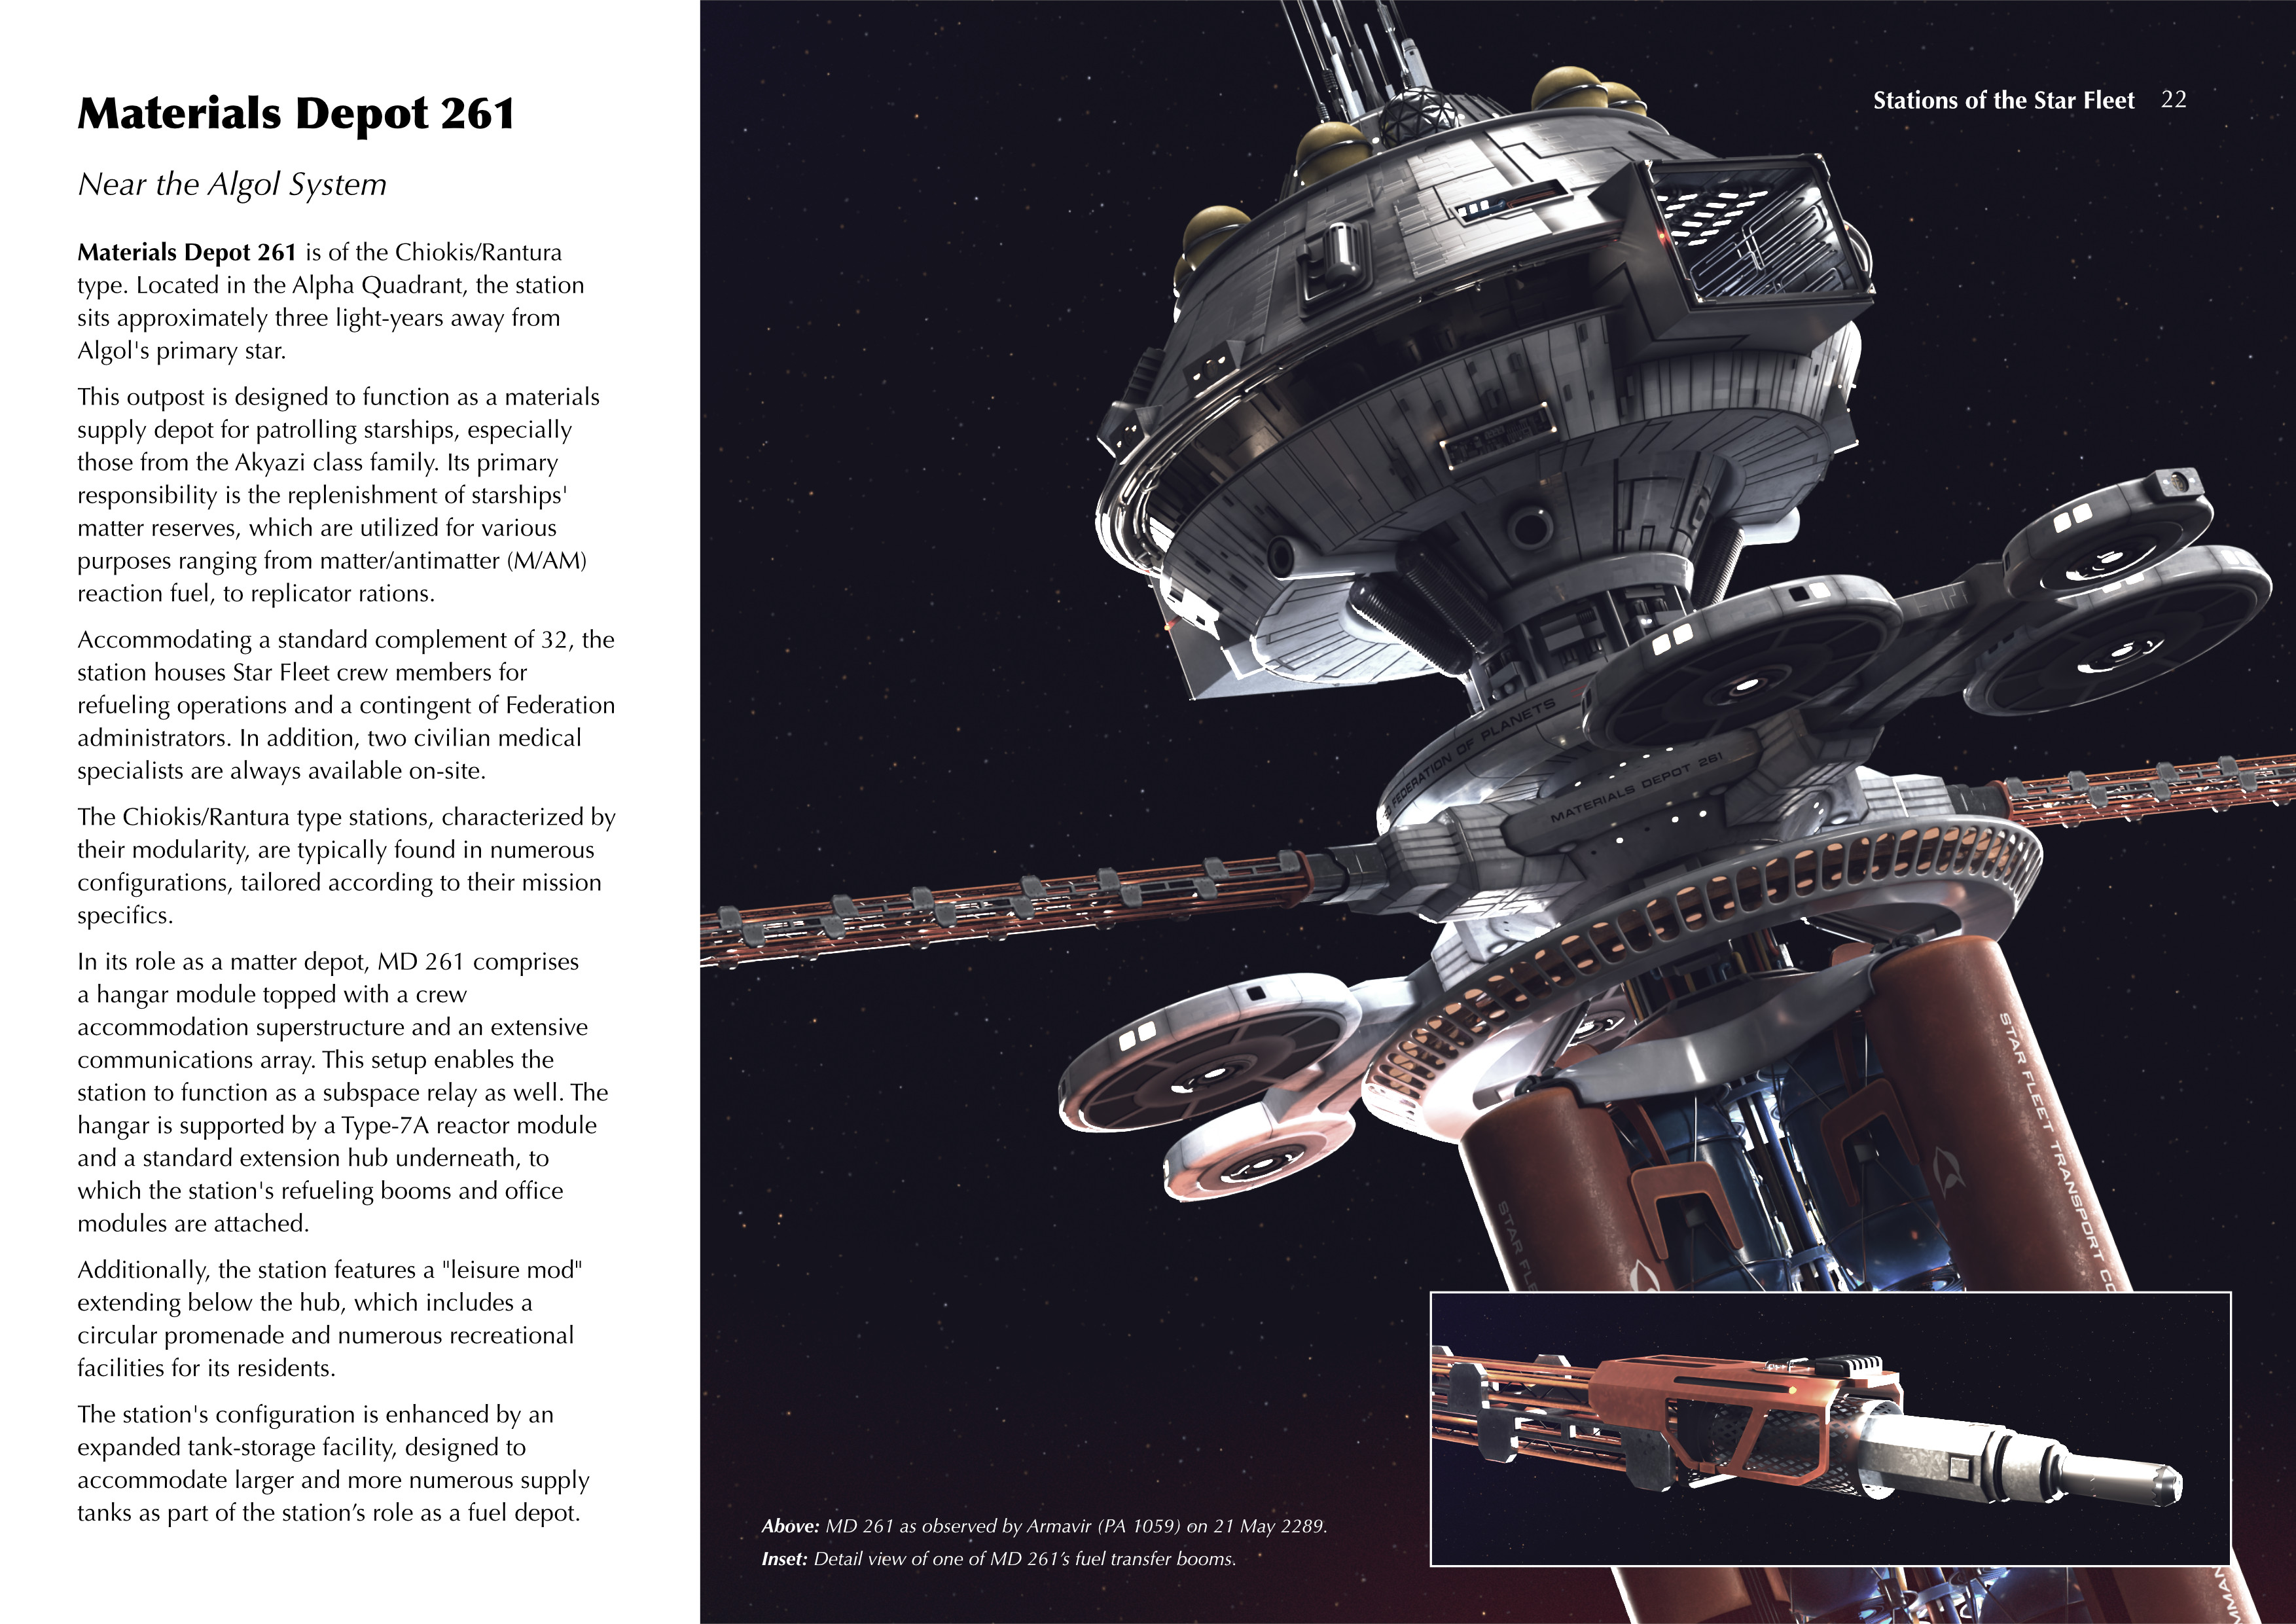 A page from a fictional "Stations of the Star Fleet," highlighting Materials Depot 261.